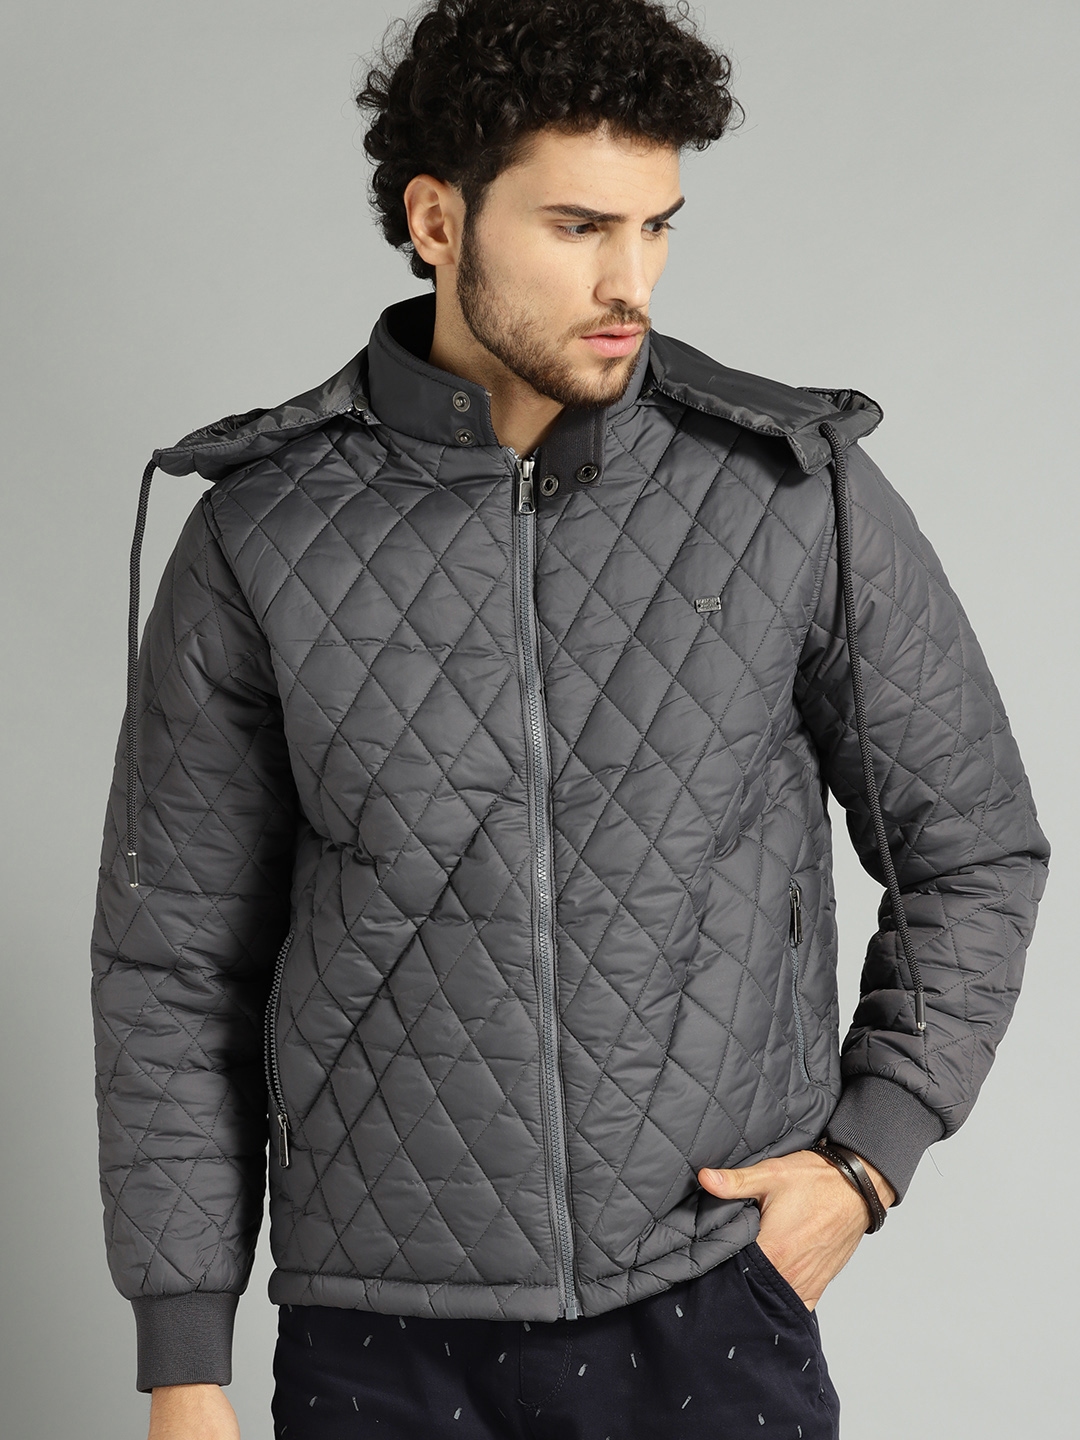 Buy The Roadster Lifestyle Co Men Charcoal Grey Solid Quilted Jacket ...